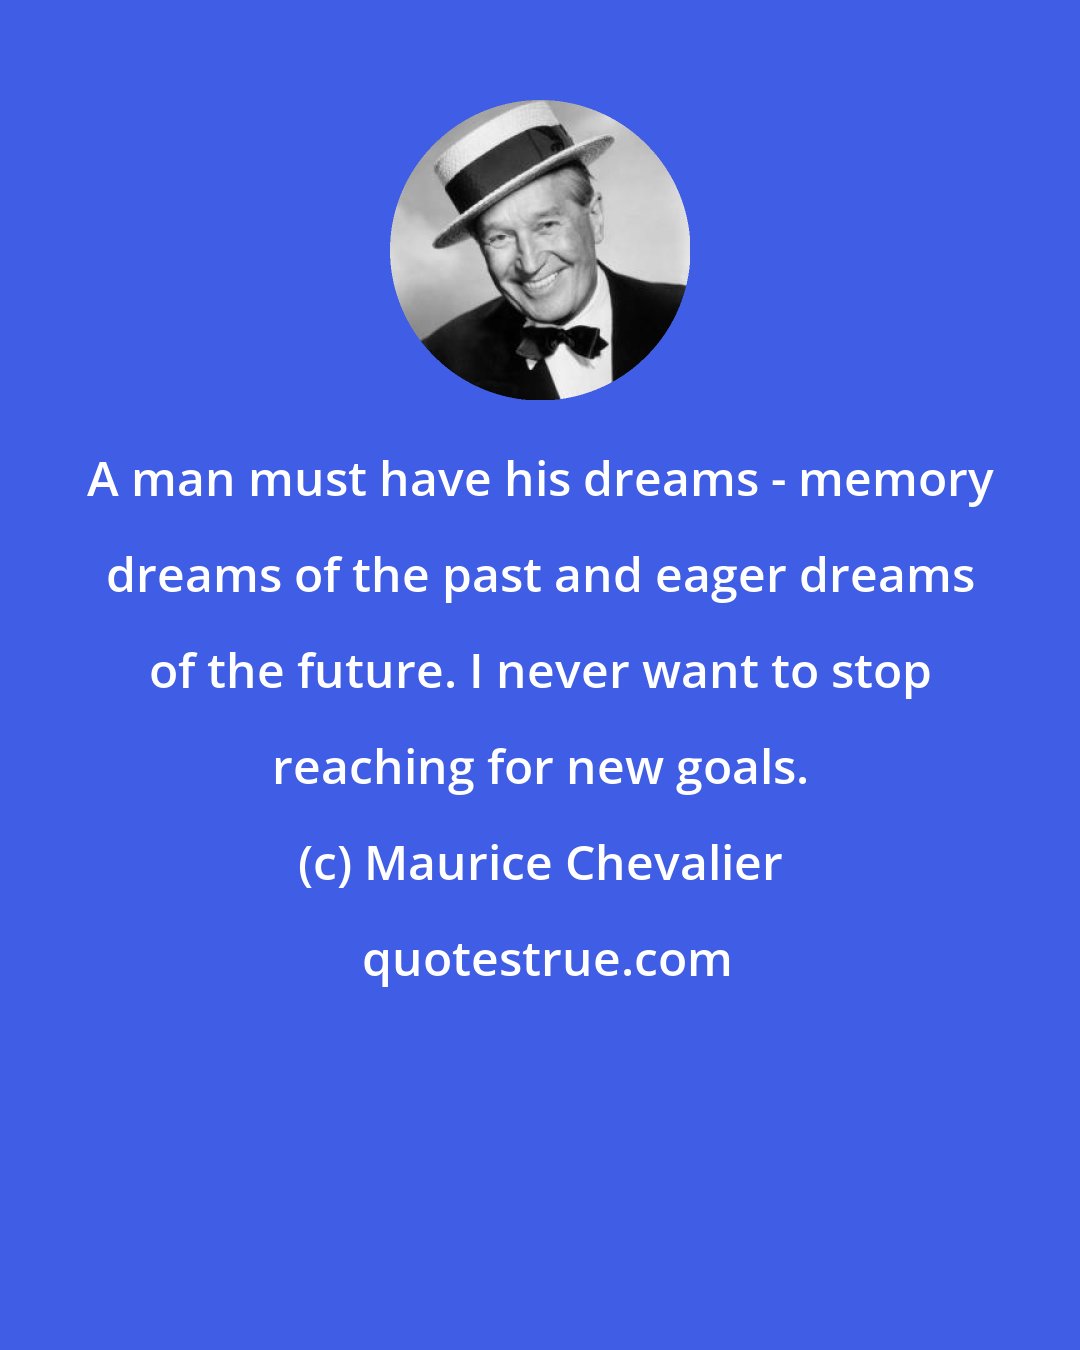 Maurice Chevalier: A man must have his dreams - memory dreams of the past and eager dreams of the future. I never want to stop reaching for new goals.